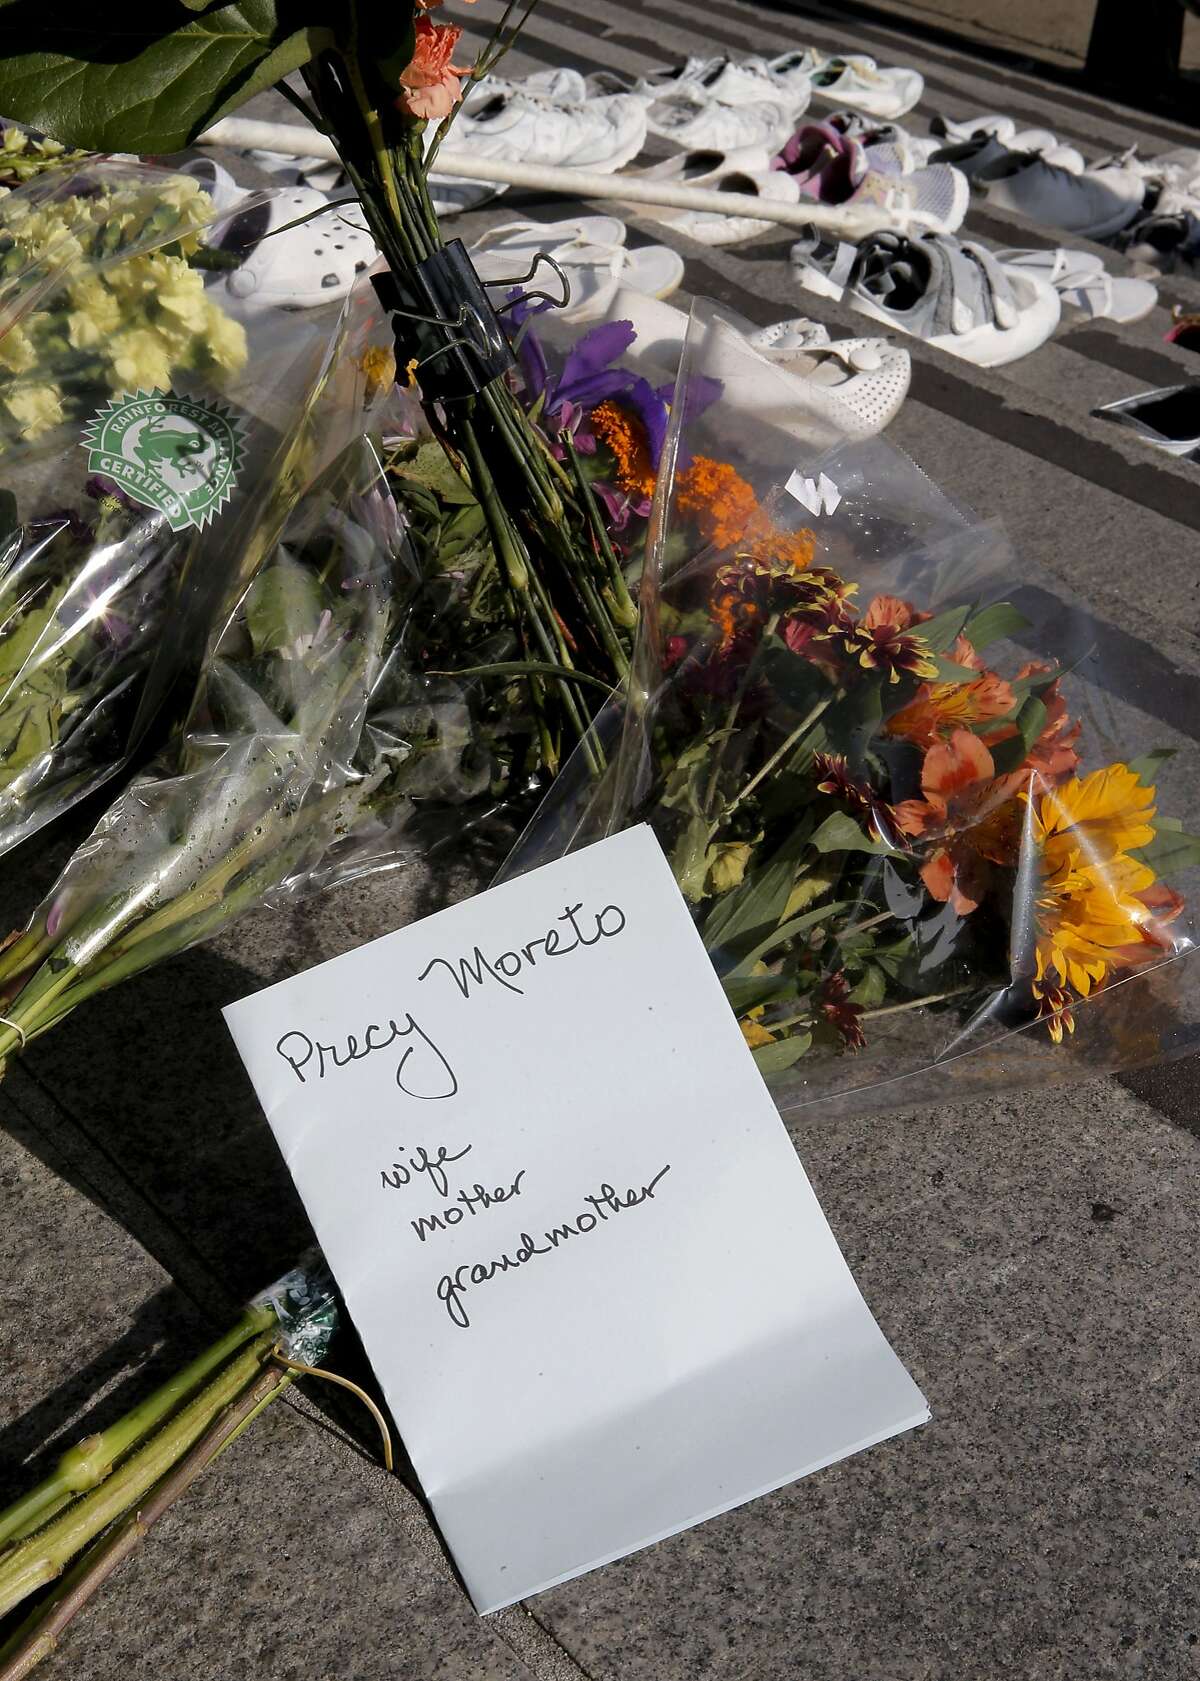 A note is placed along with flowers, on Friday Nov. 7, 2014, as members of San Francisco's Vision Zero Coalition gathered on the steps of City Hall in San Francisco, Calif. to draw attention to the alarming increase of traffic related deaths on the streets of the city in 2014.